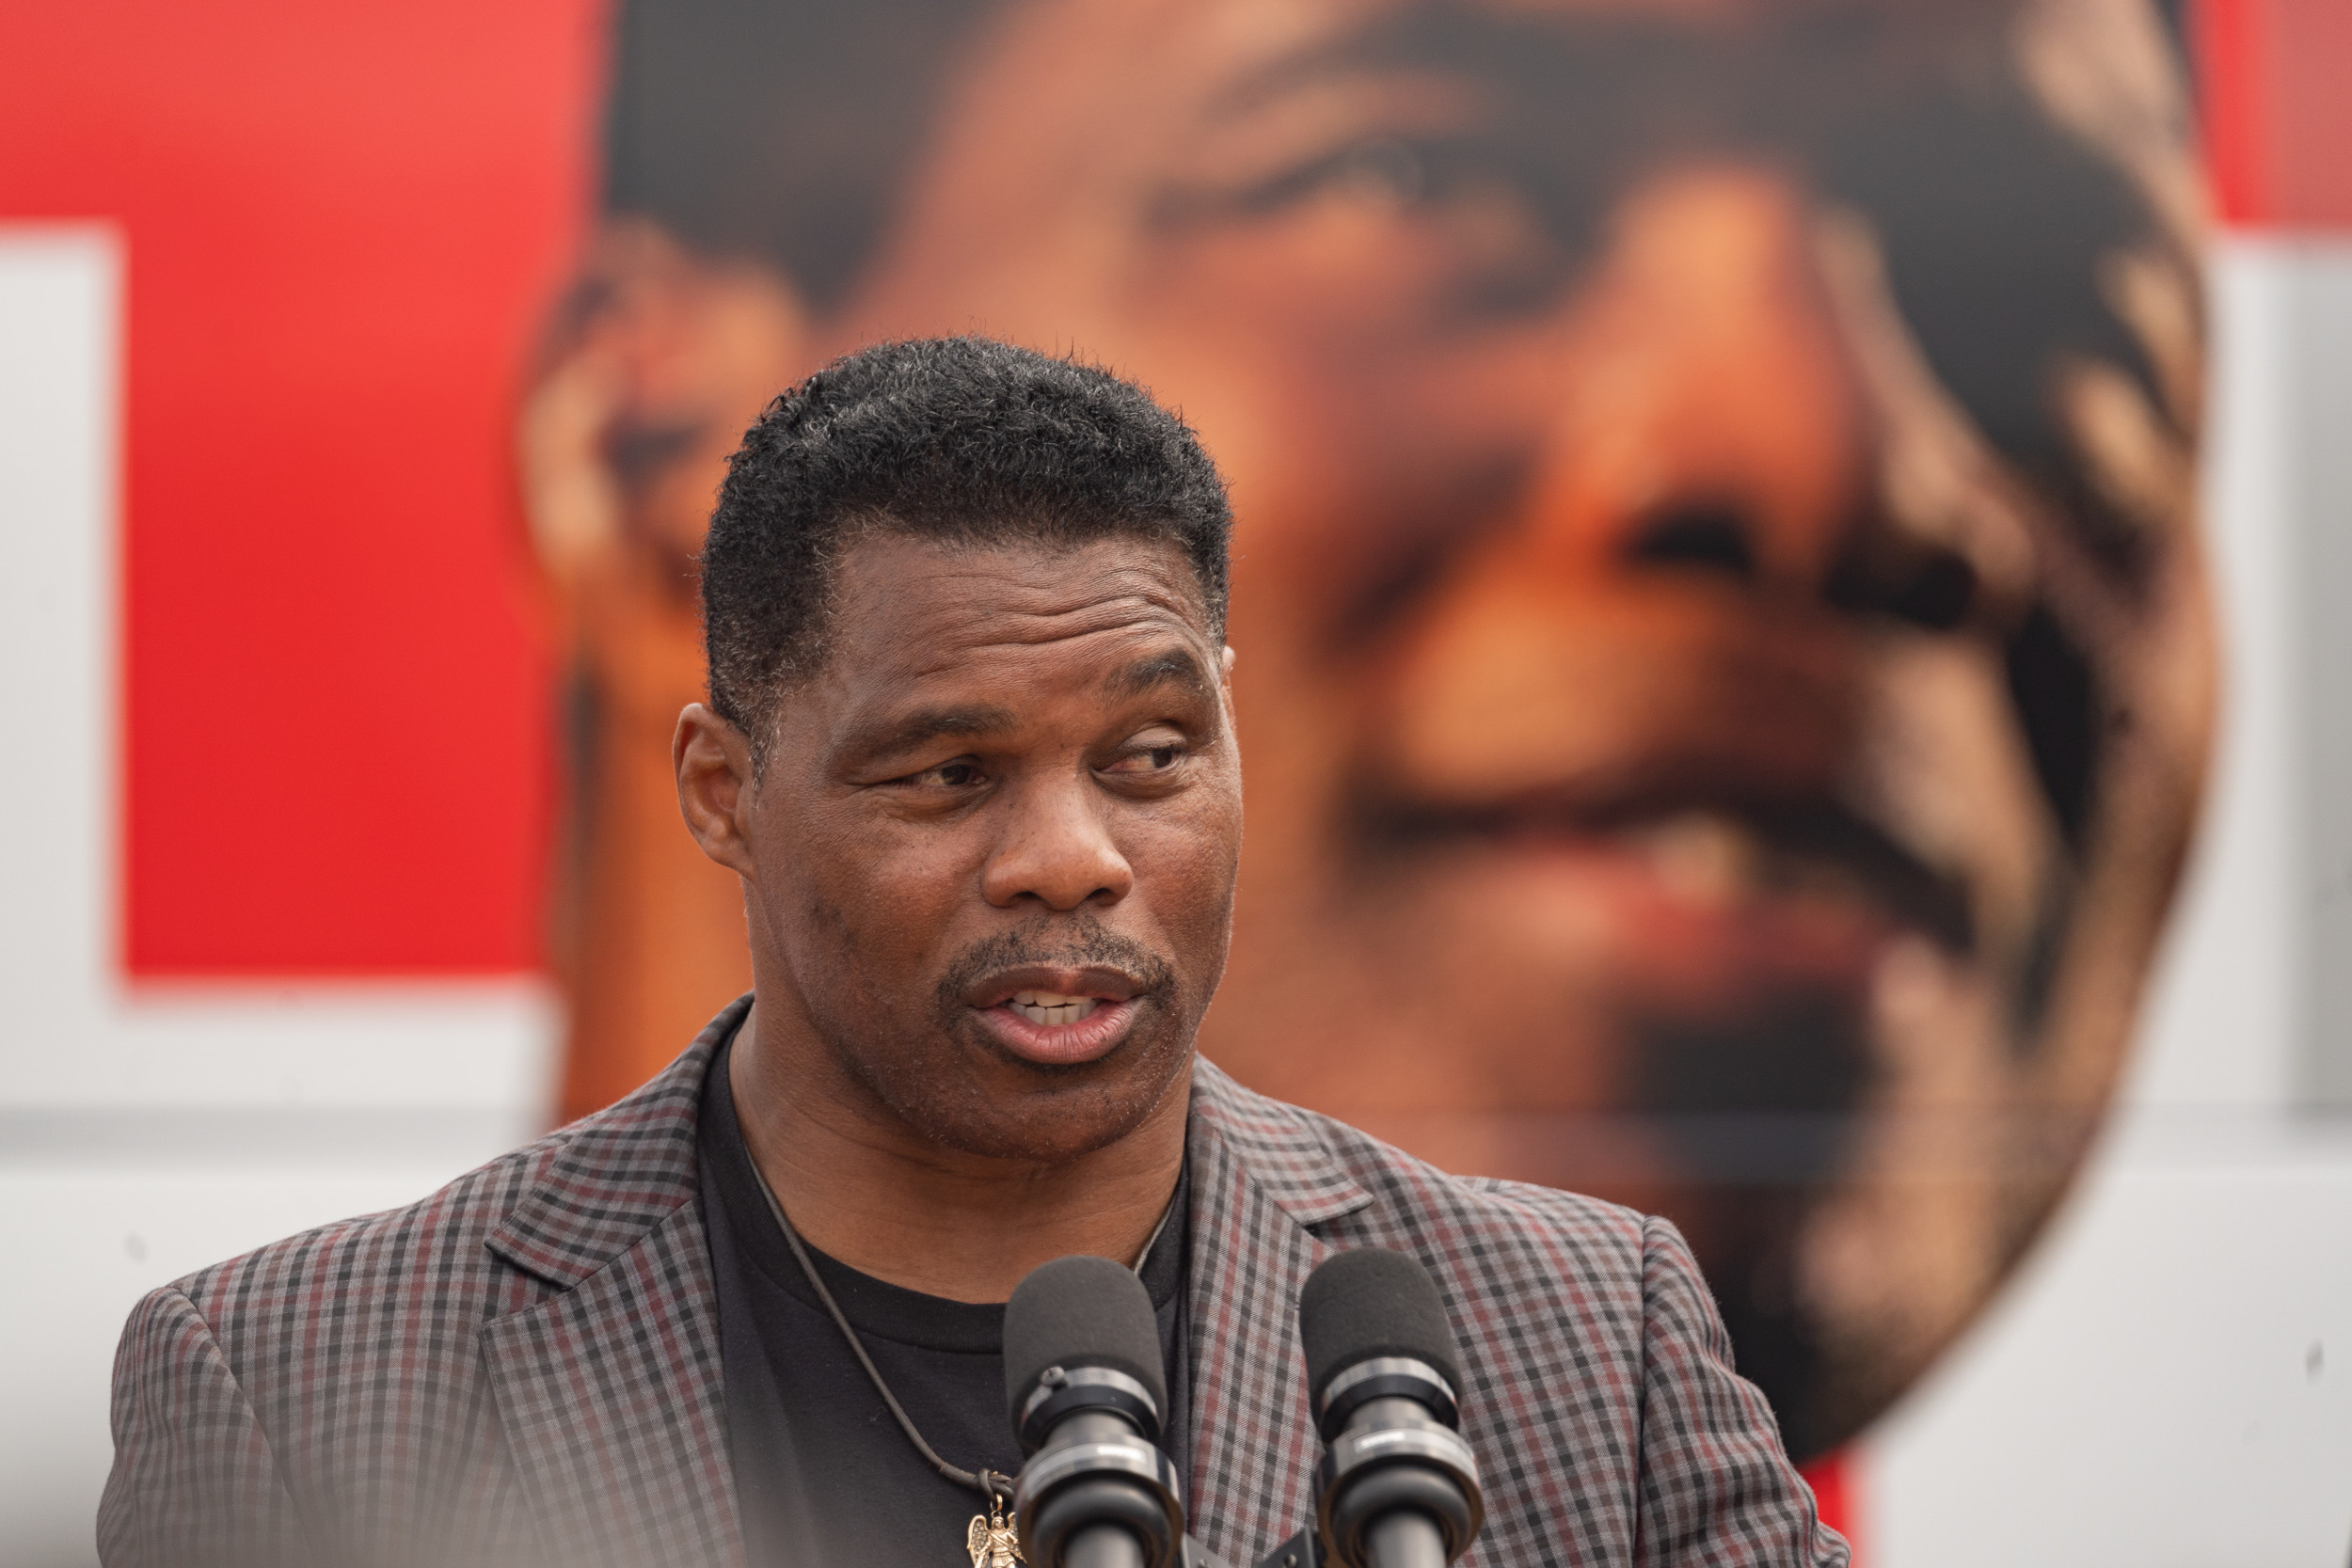 Herschel Walker dismisses Texas home, says he’s lived in Georgia whole life